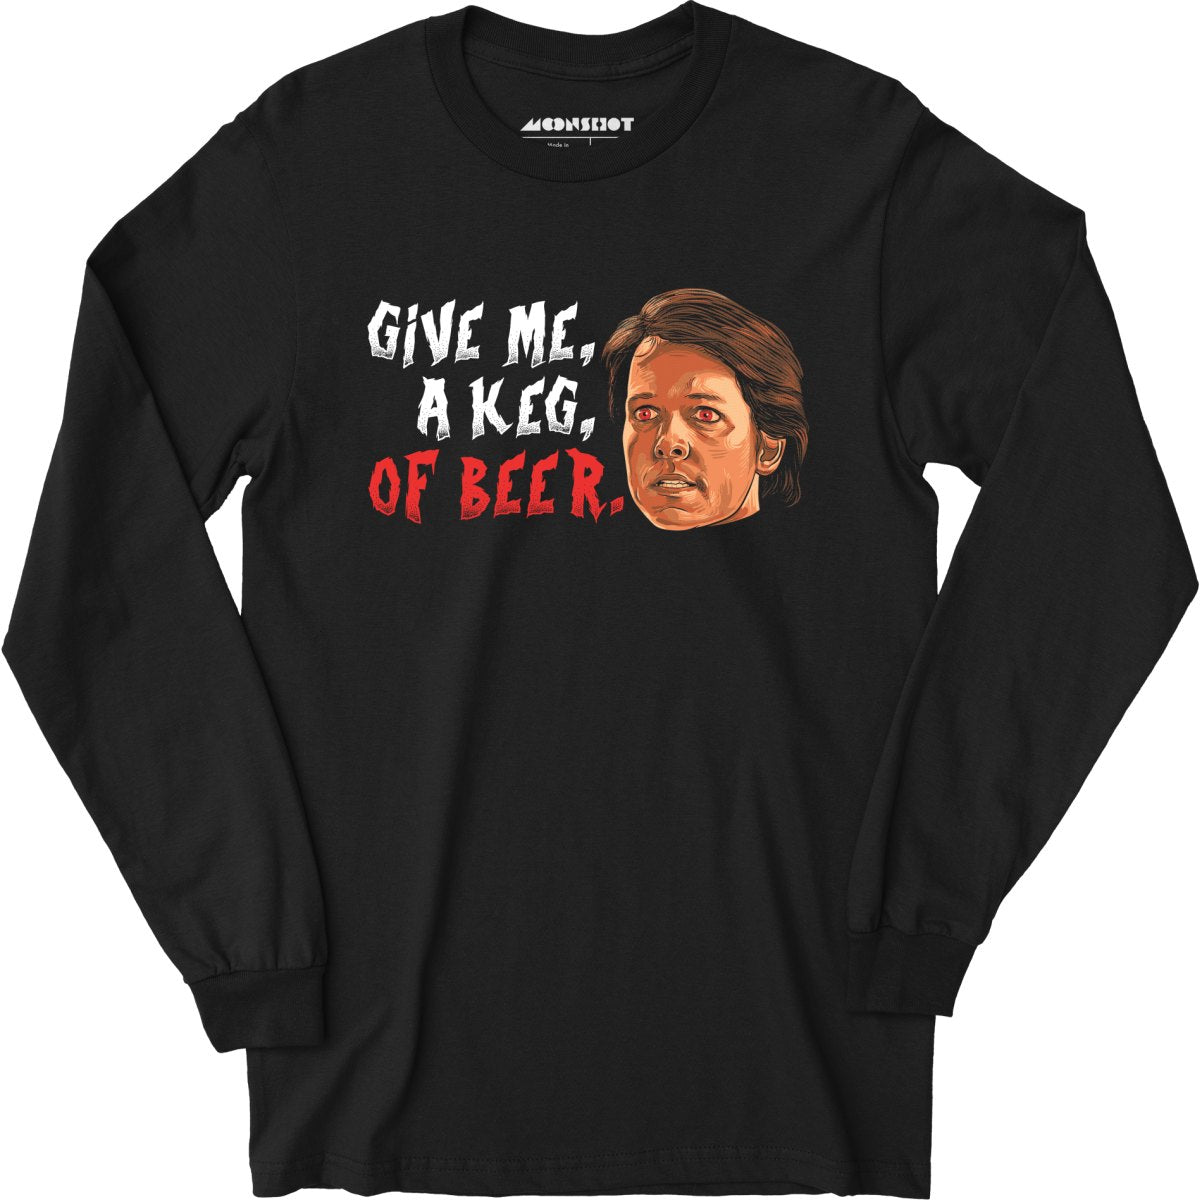 Give Me, a Keg, of Beer - Long Sleeve T-Shirt